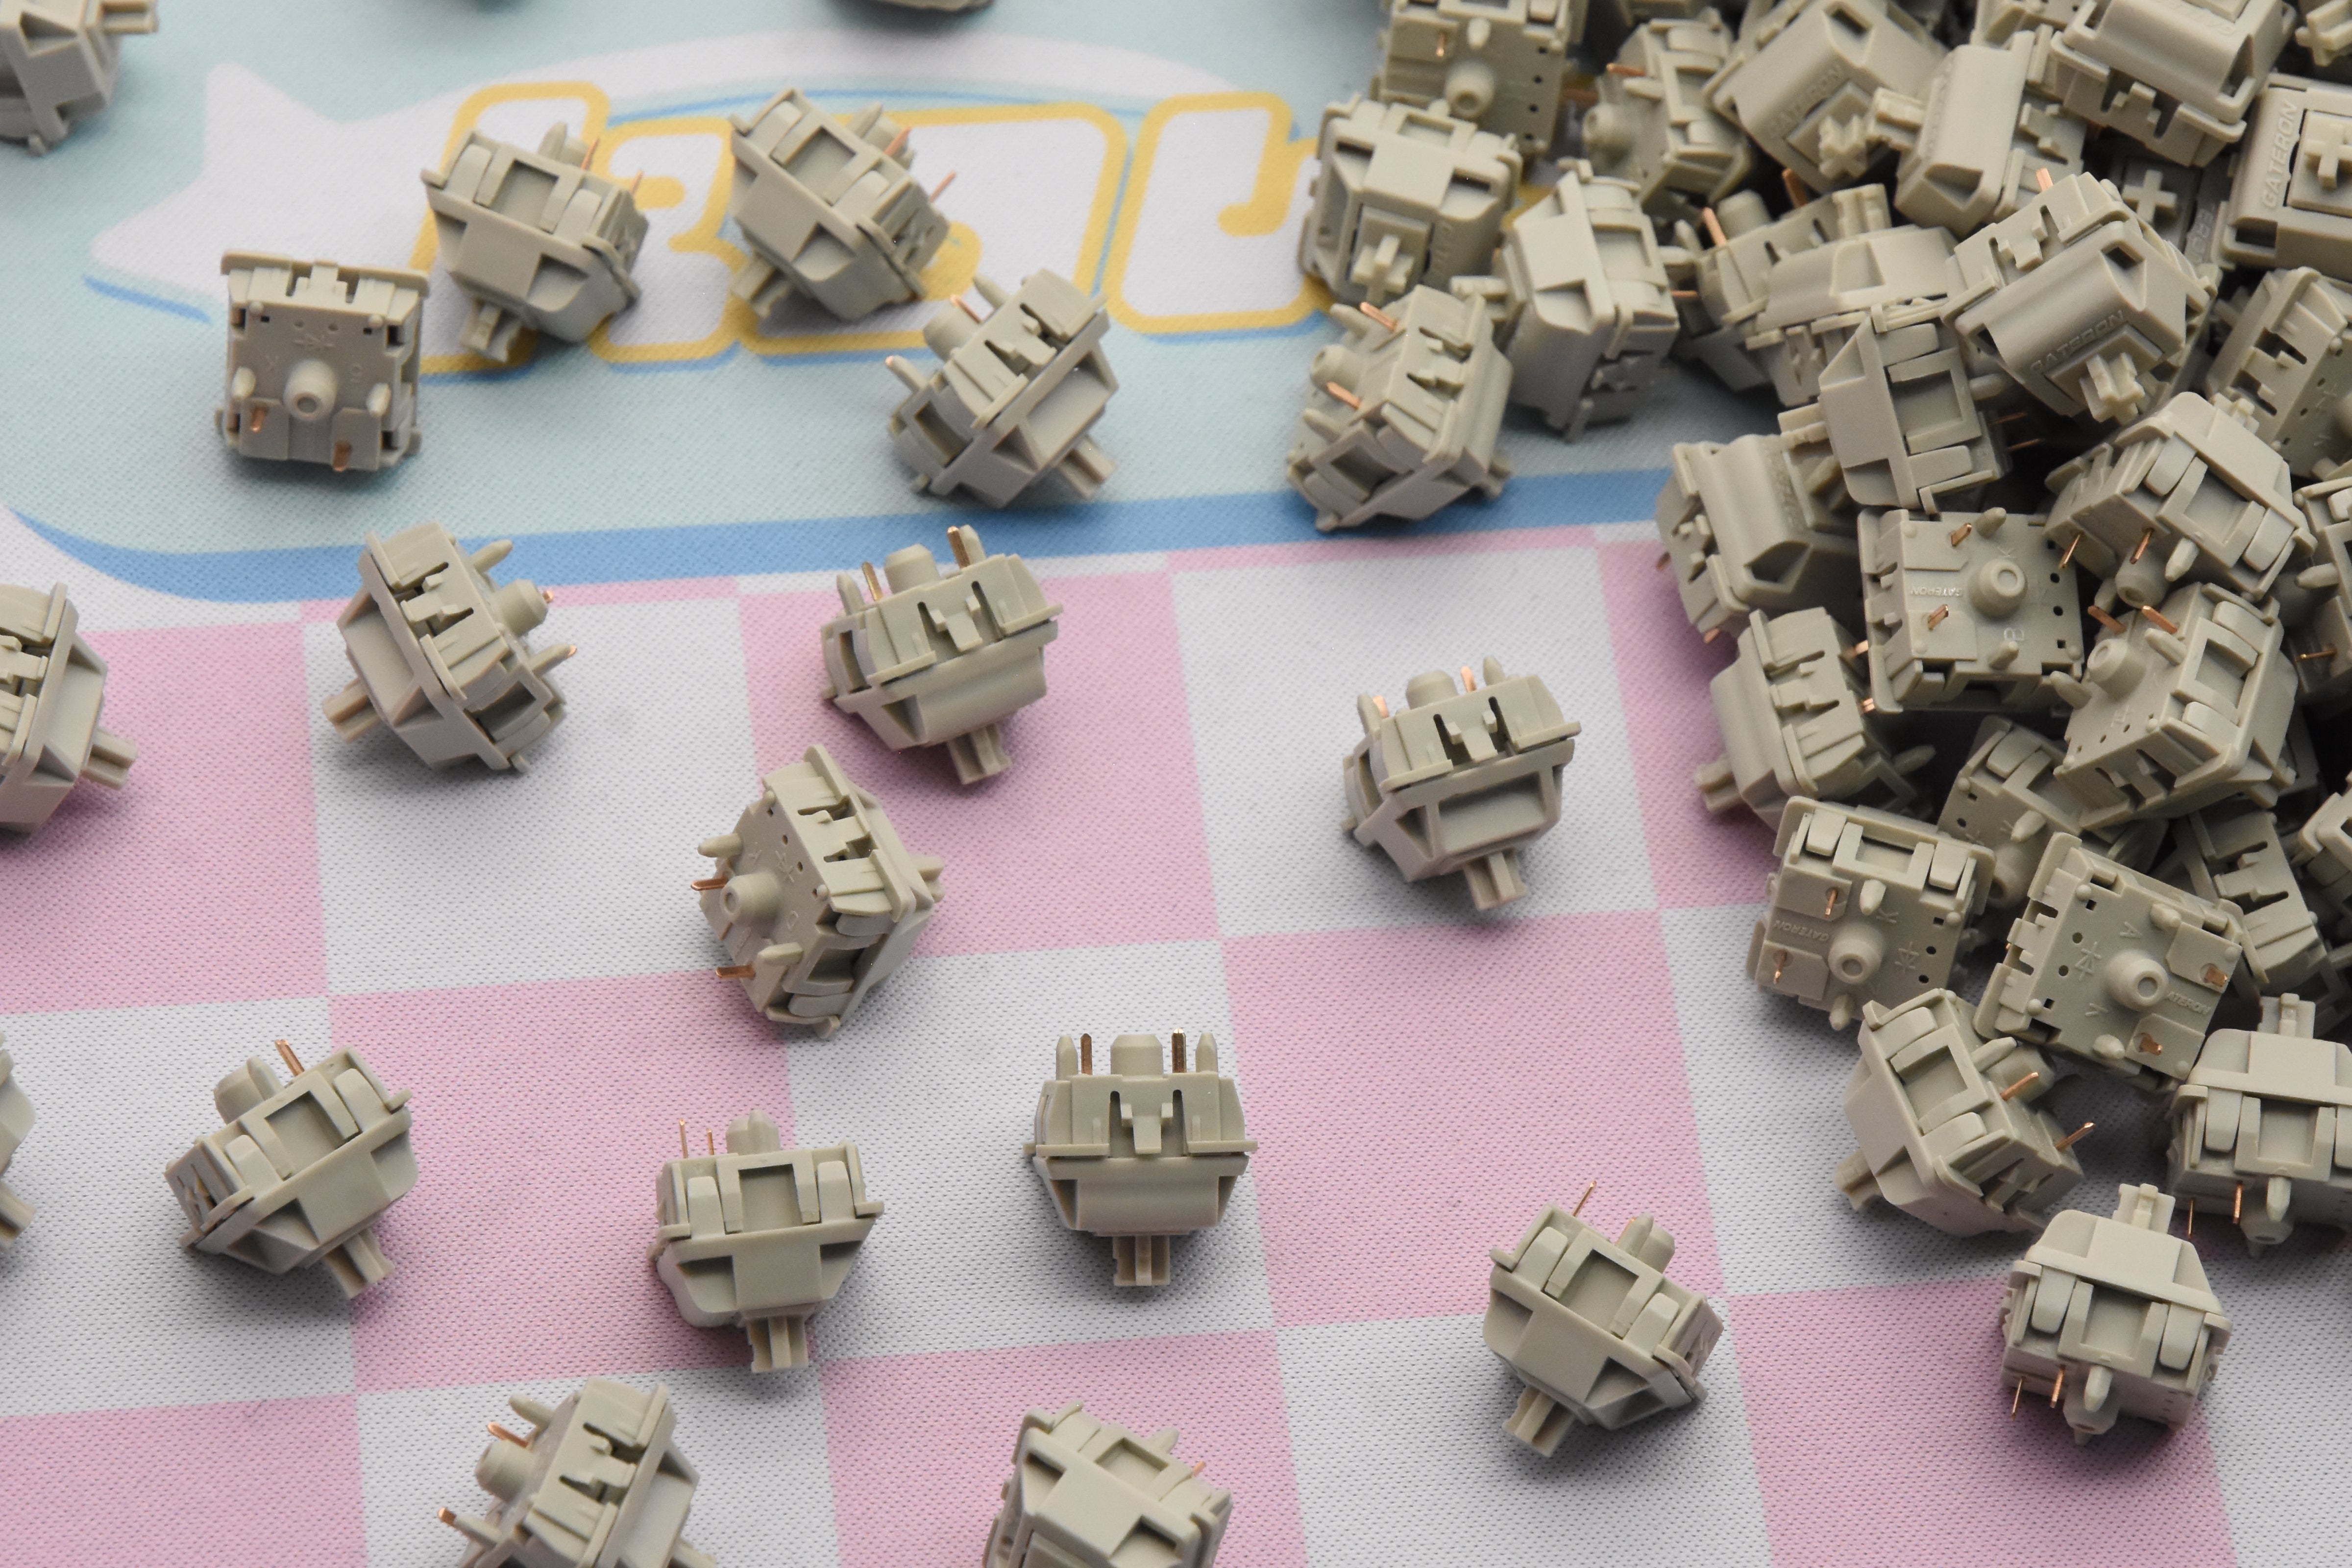 SILLYWORKS X GATERON TYPE A LINEAR SWITCH FACTORY LUBED EDITION (10PCS)